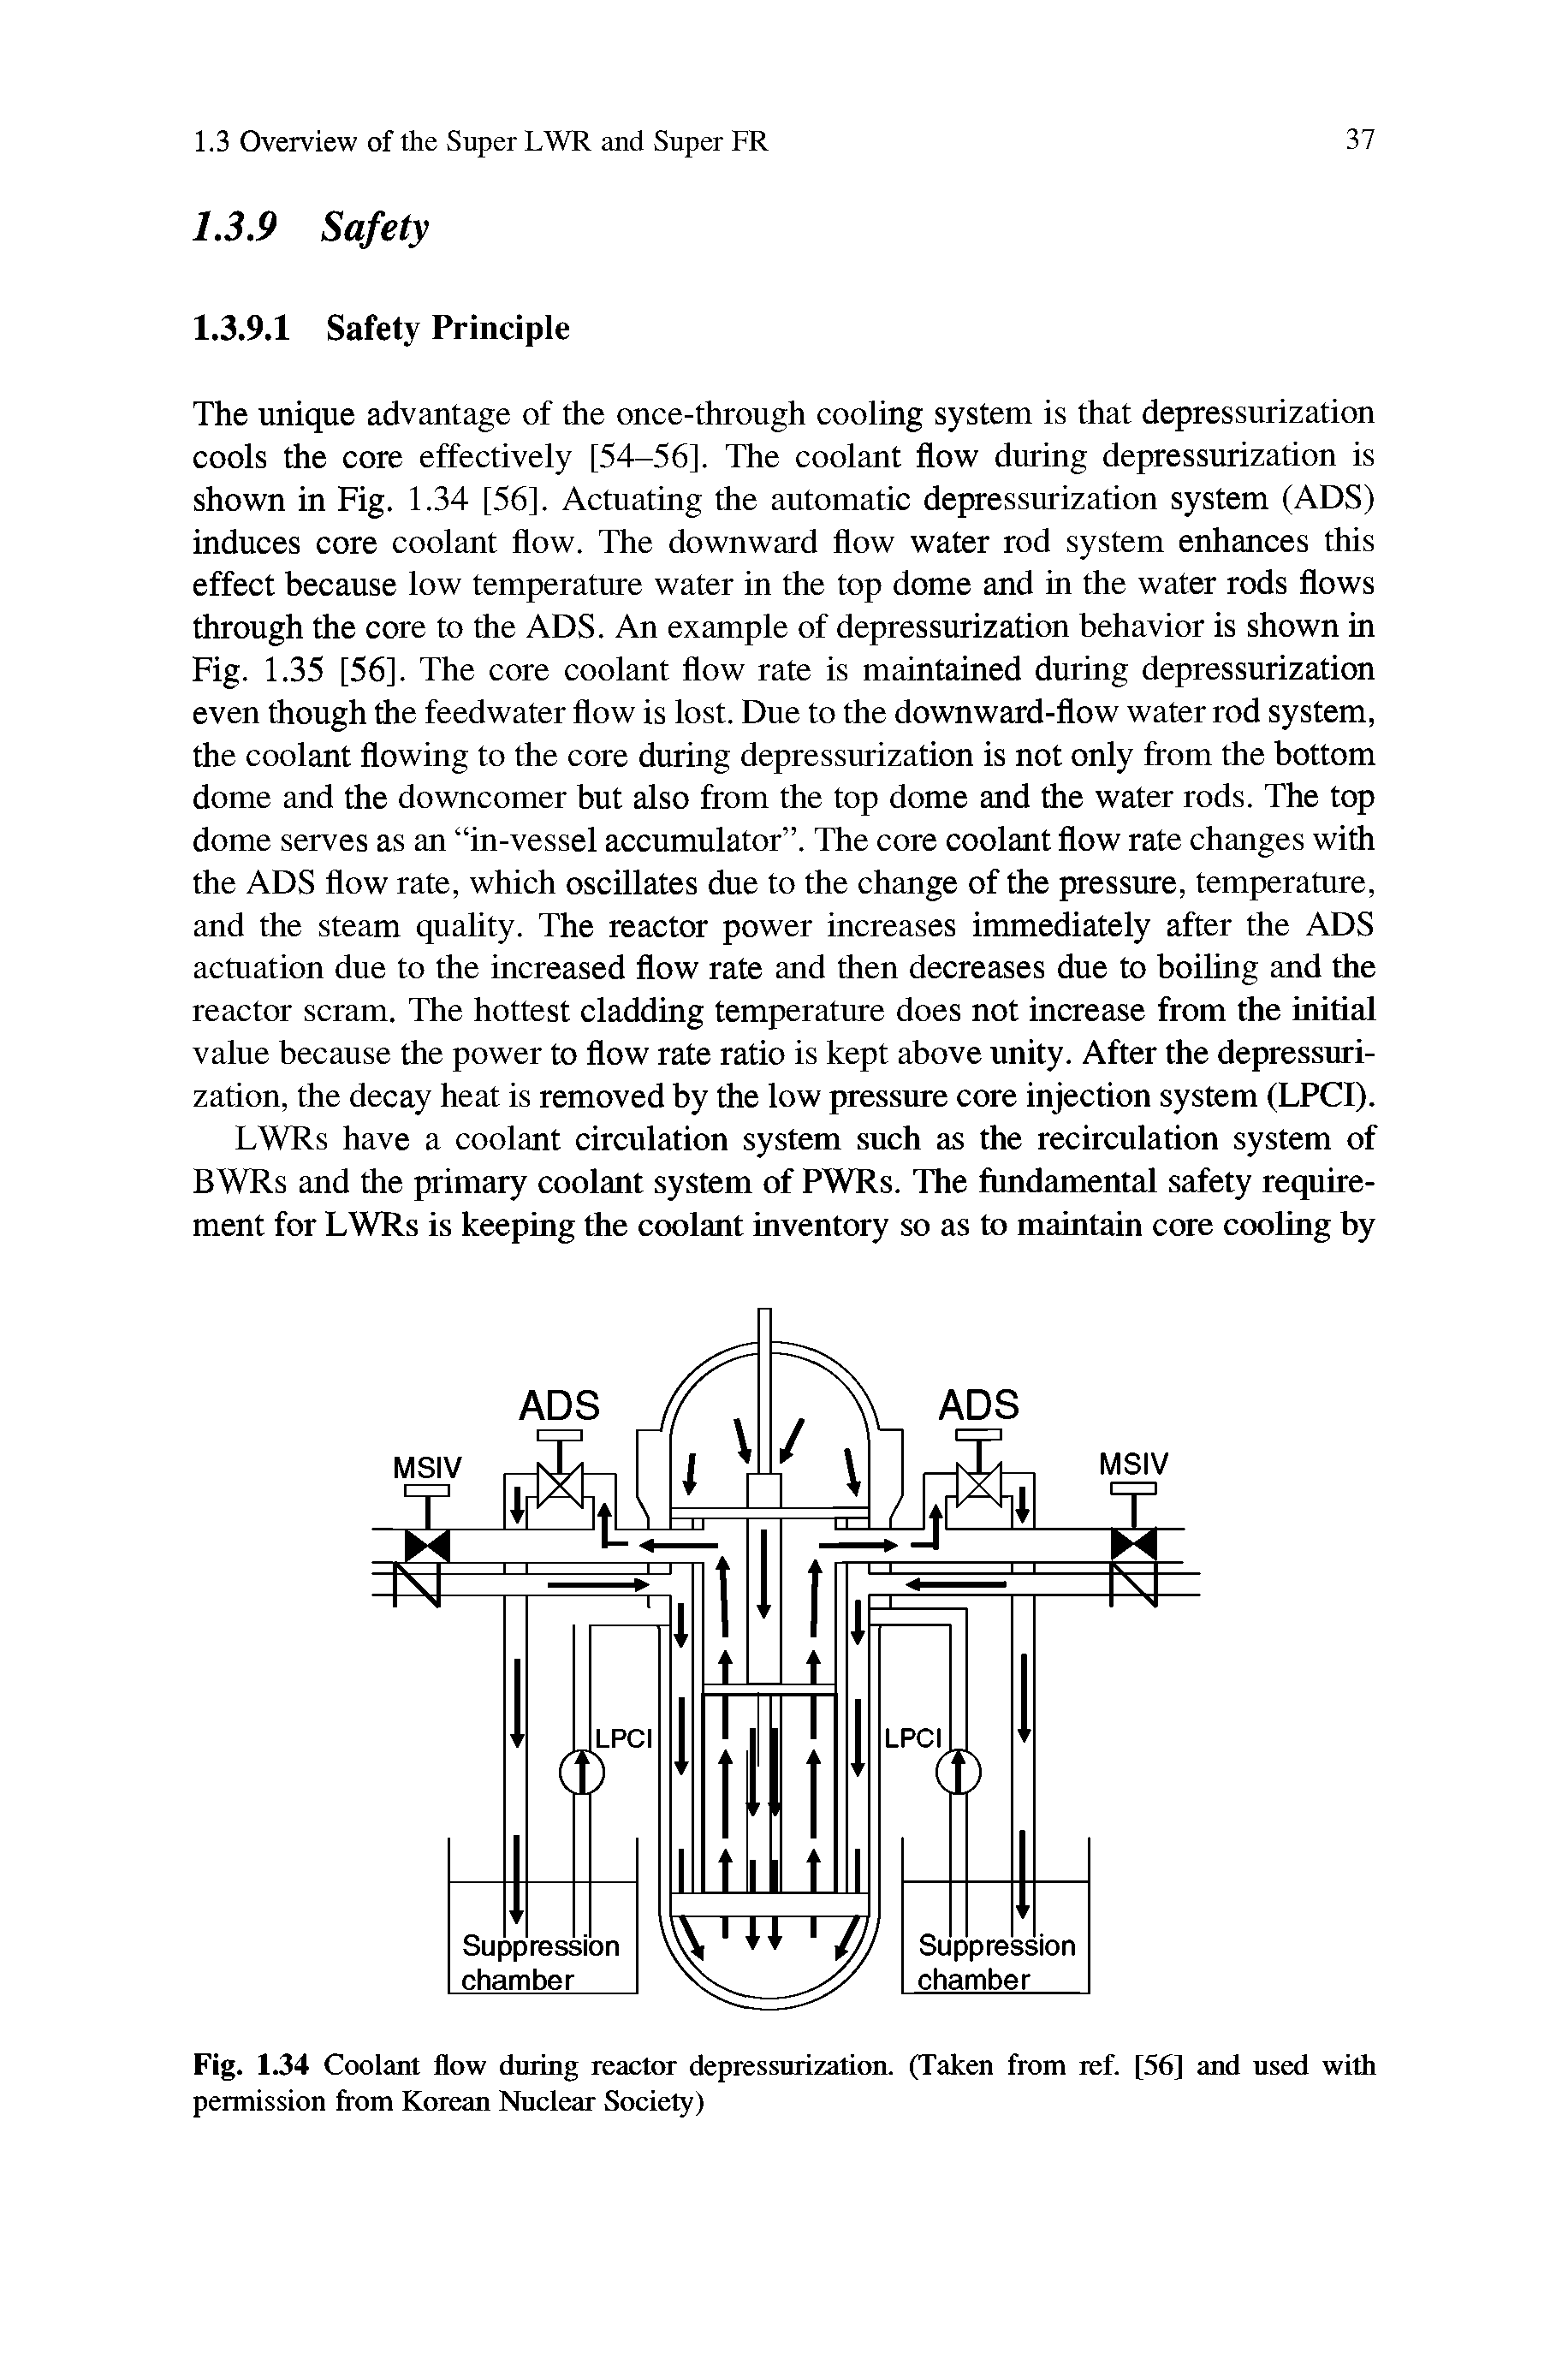 Fig. 1.34 Coolant flow during reactor depressurization. (Taken from ref. [56] and used with permission from Korean Nuclear Society)...